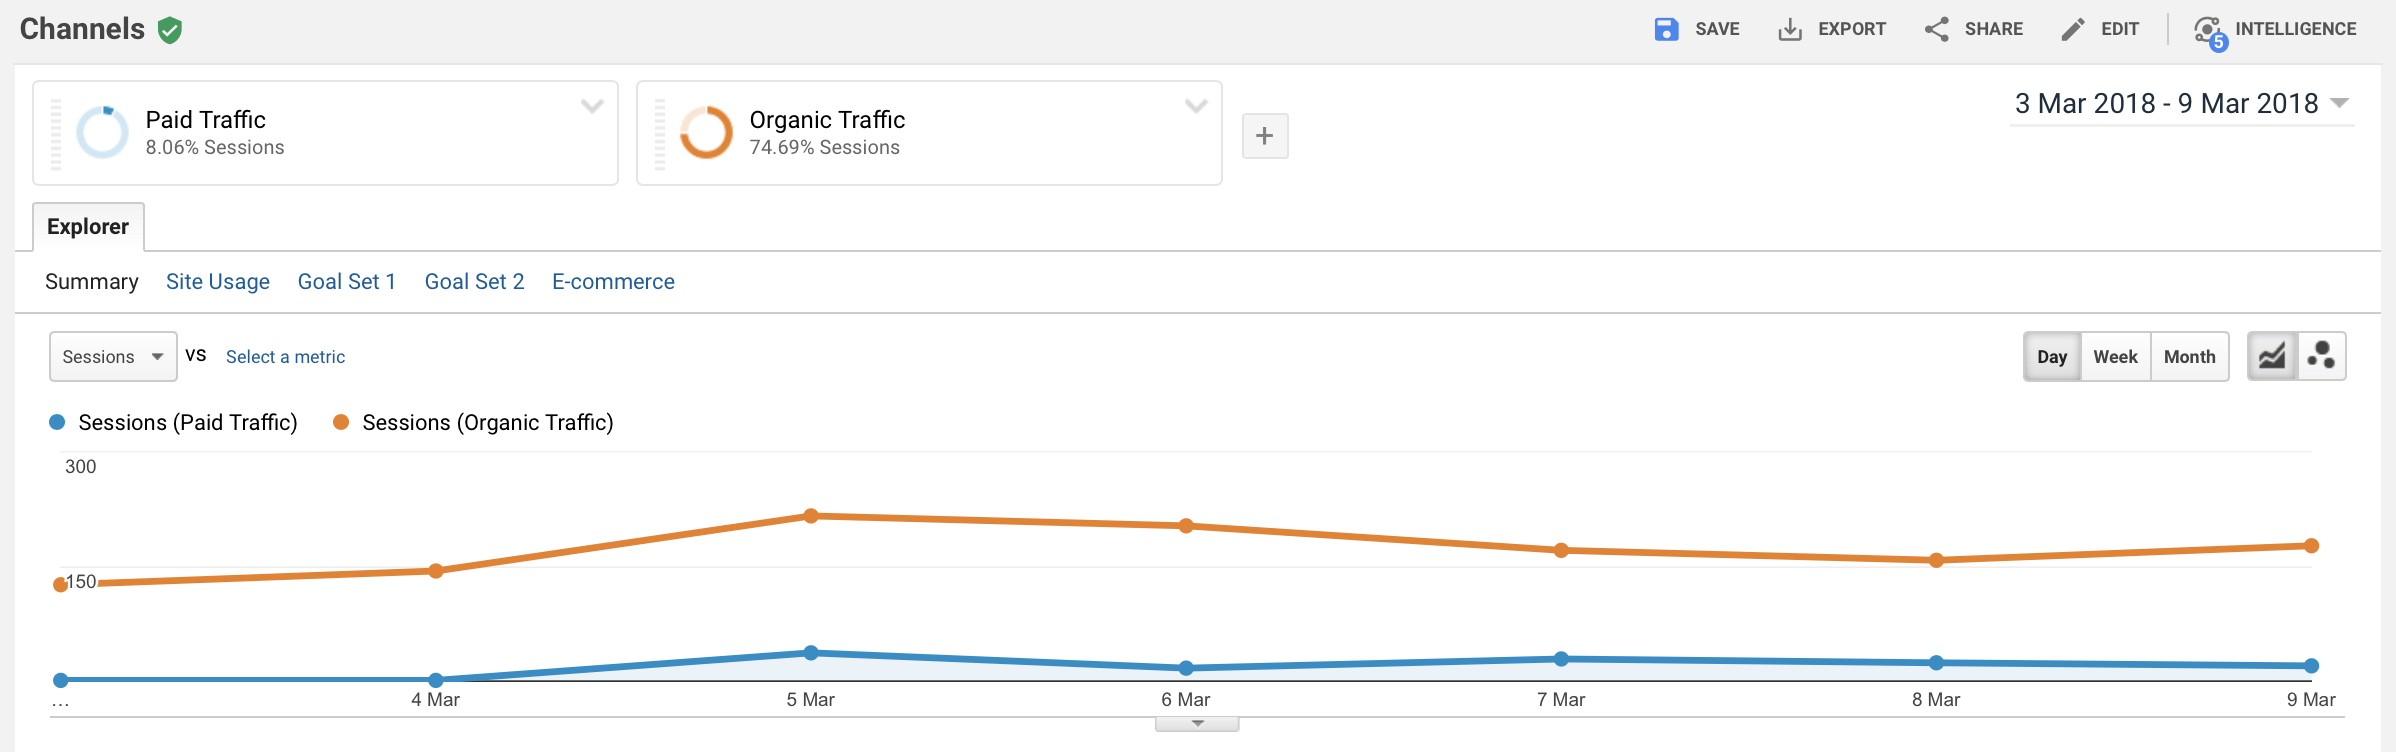 comparison of organic and paid traffic in google analytics, pie charts, and trend graph